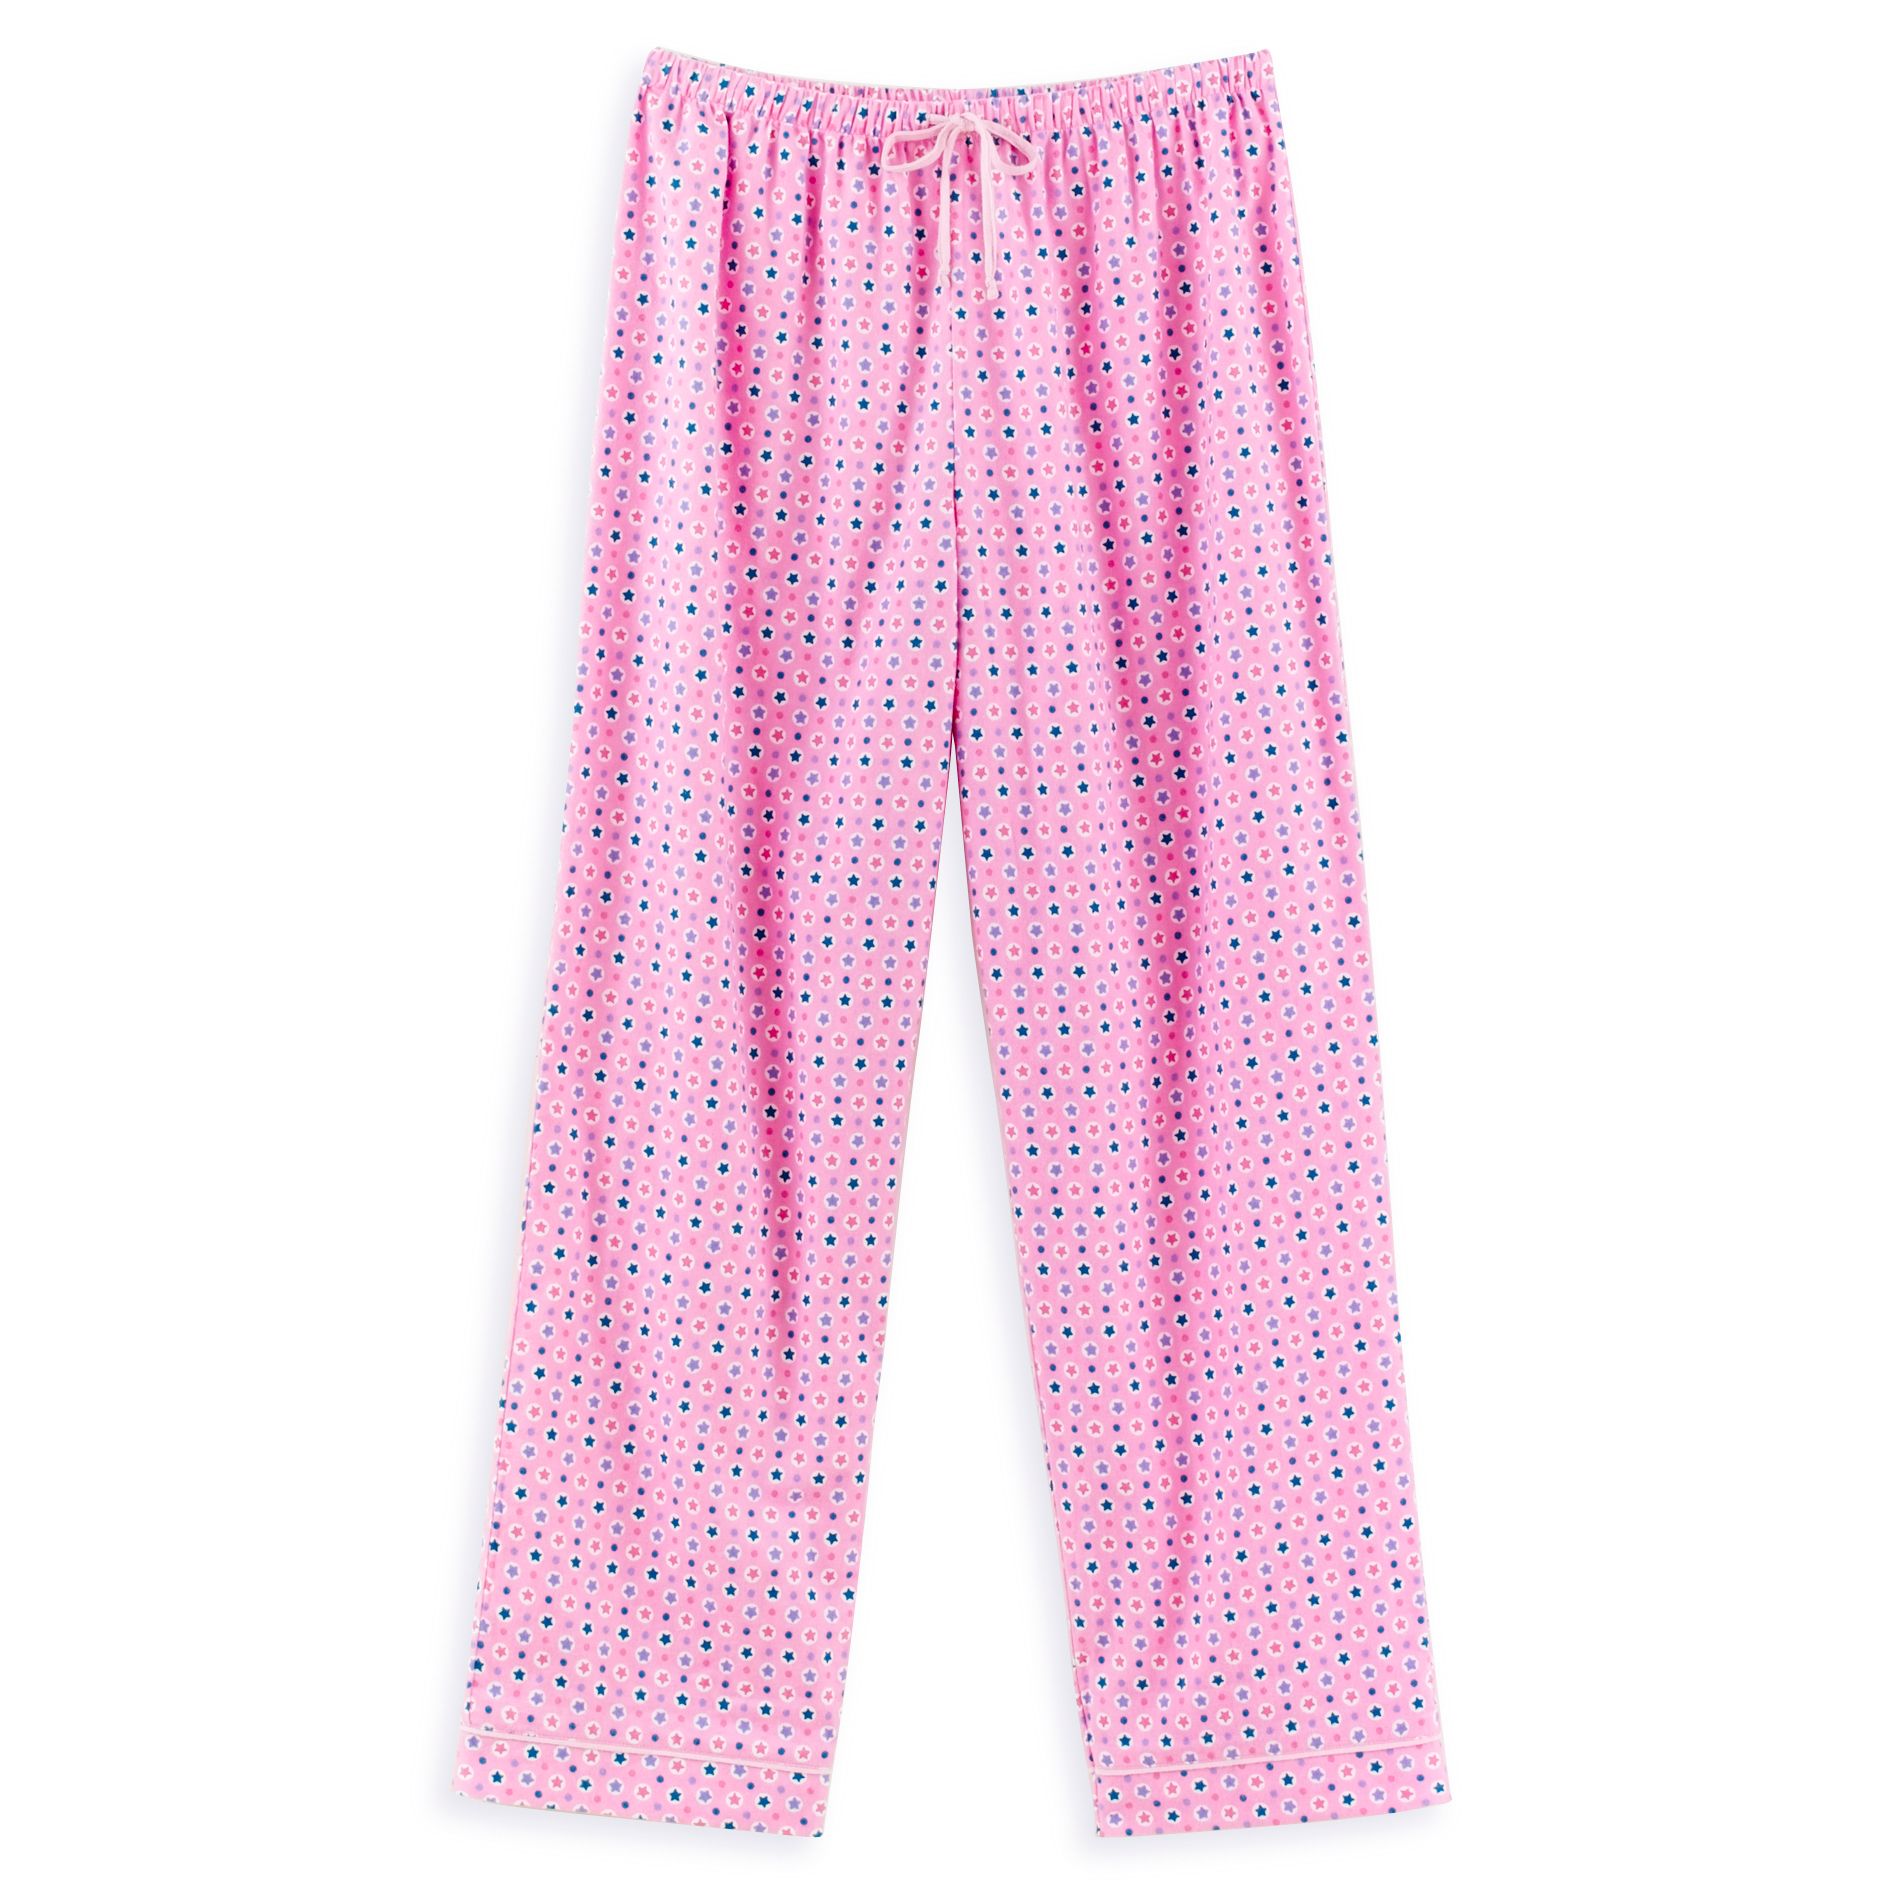 Classic Elements Print Flannel Pant With Solid Trim